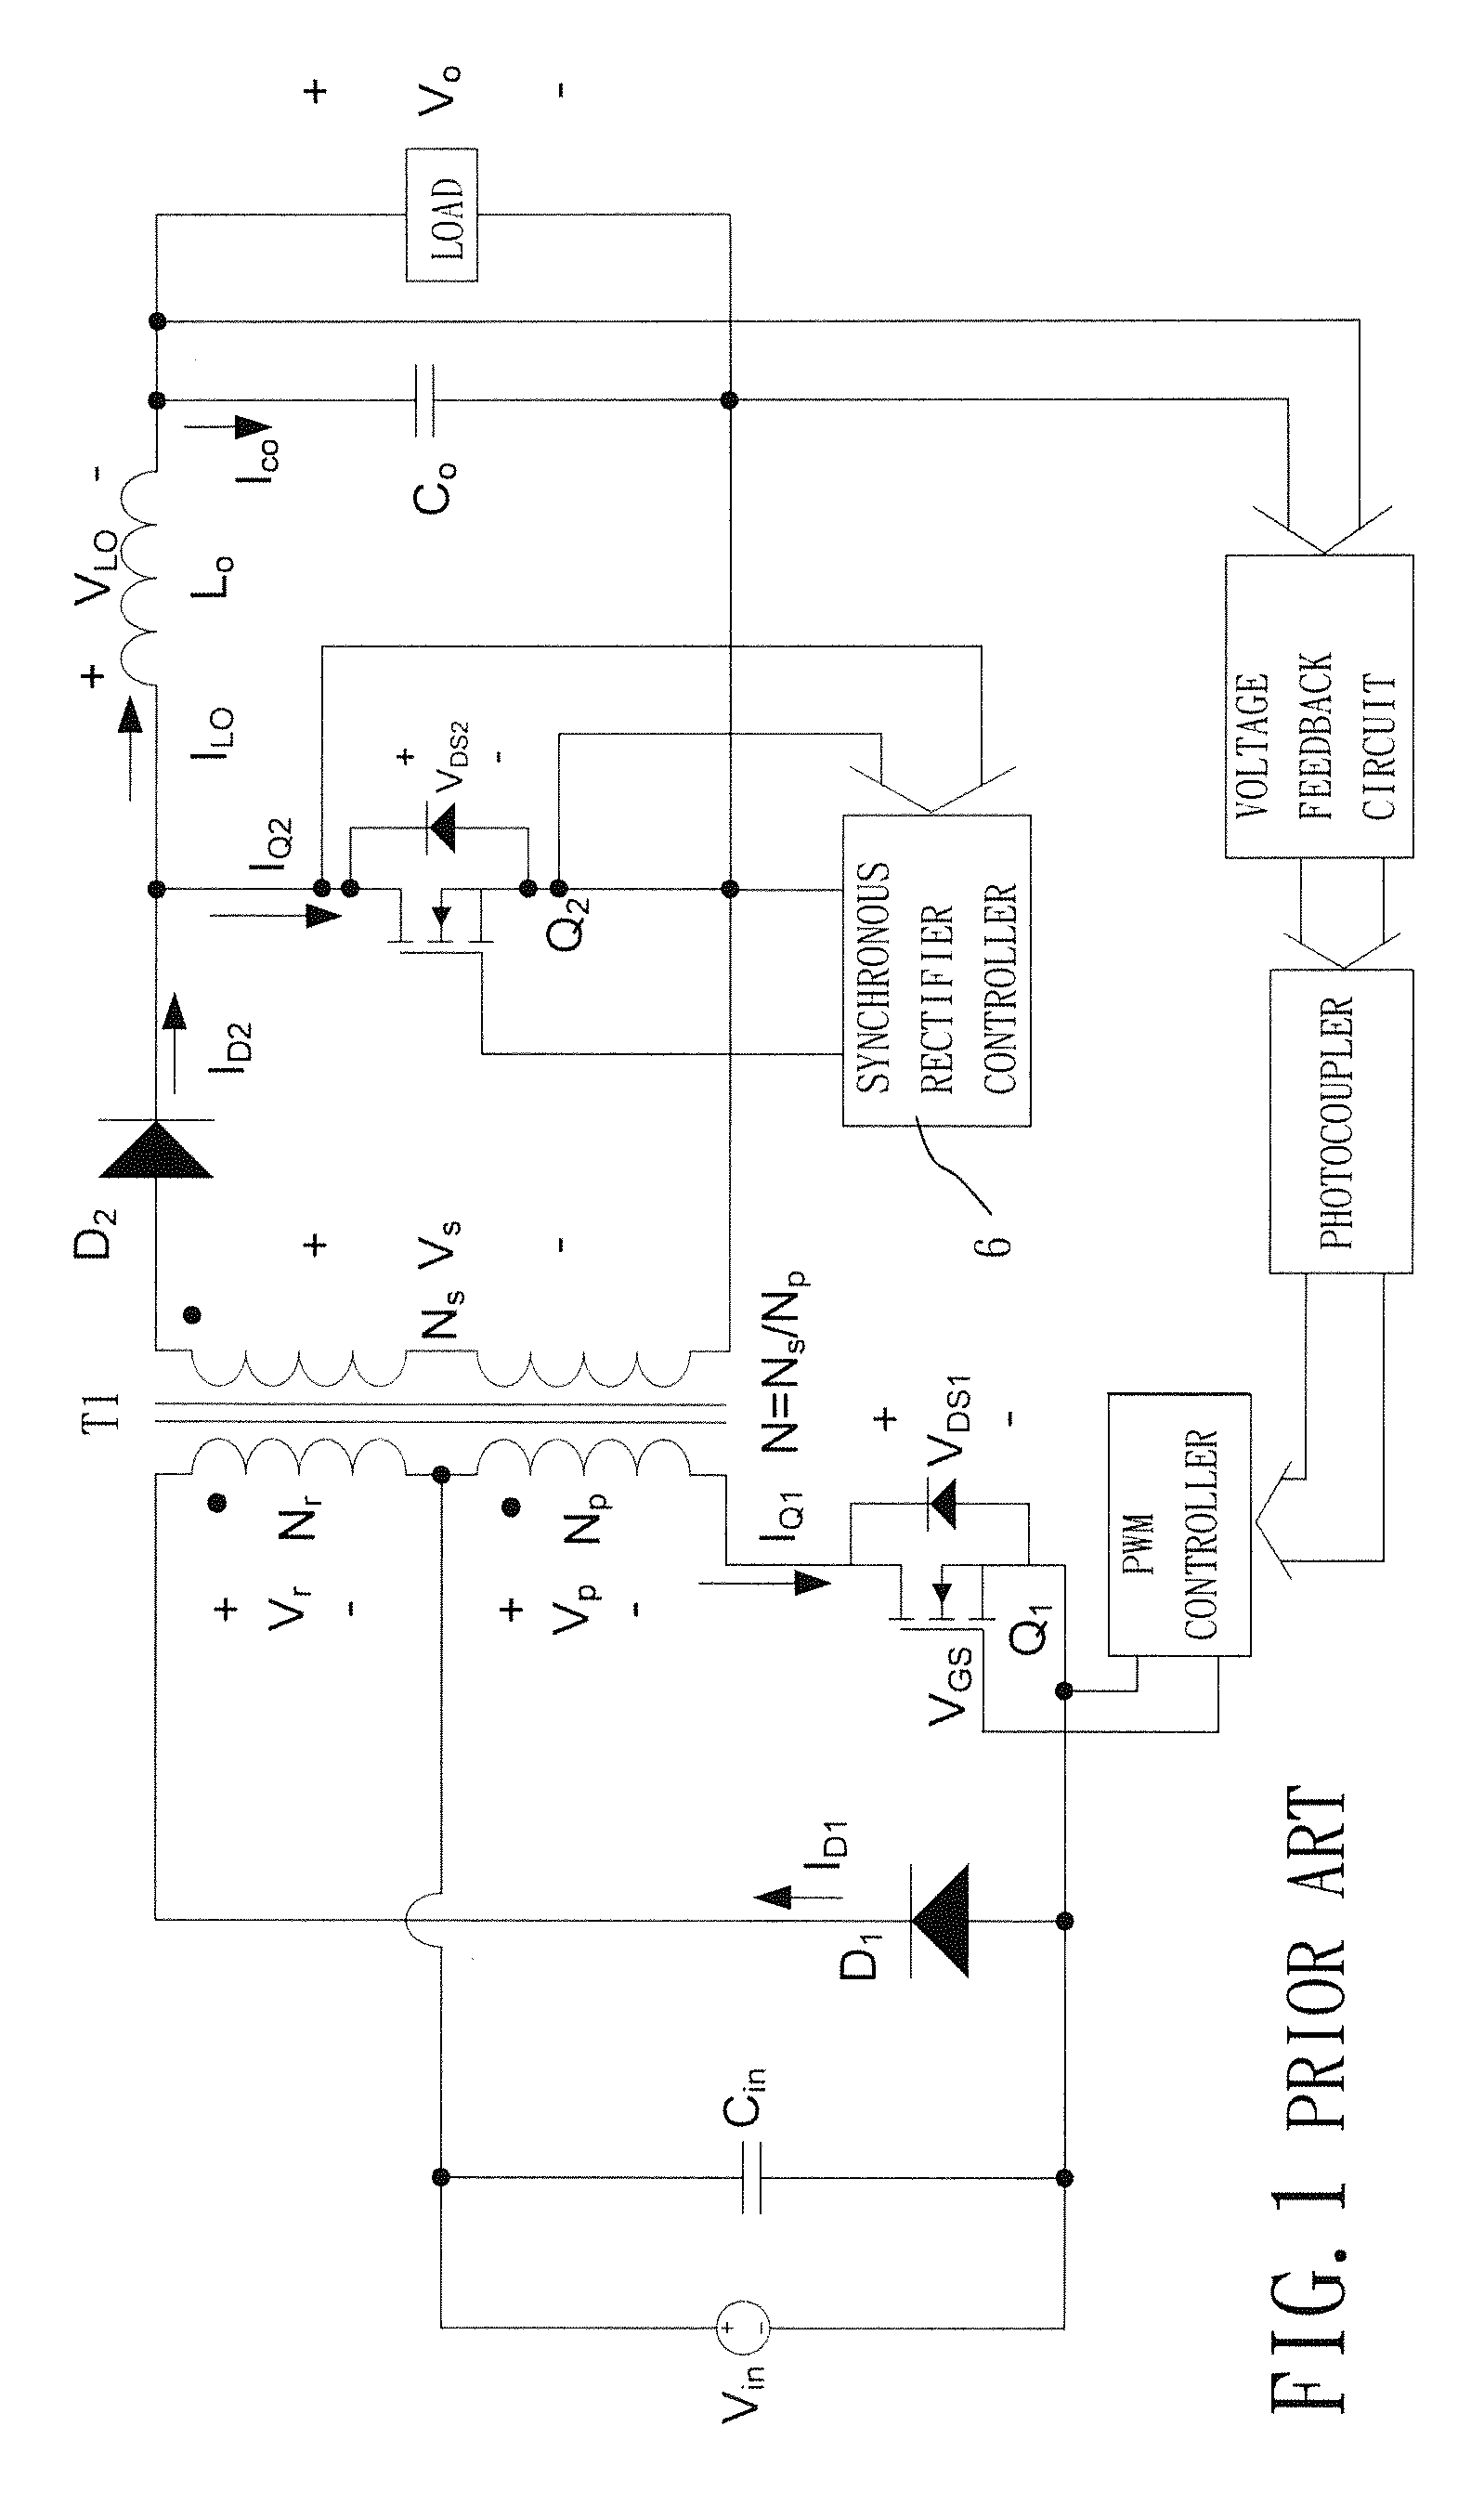 Isolated converter with initial rising edge PWM delay